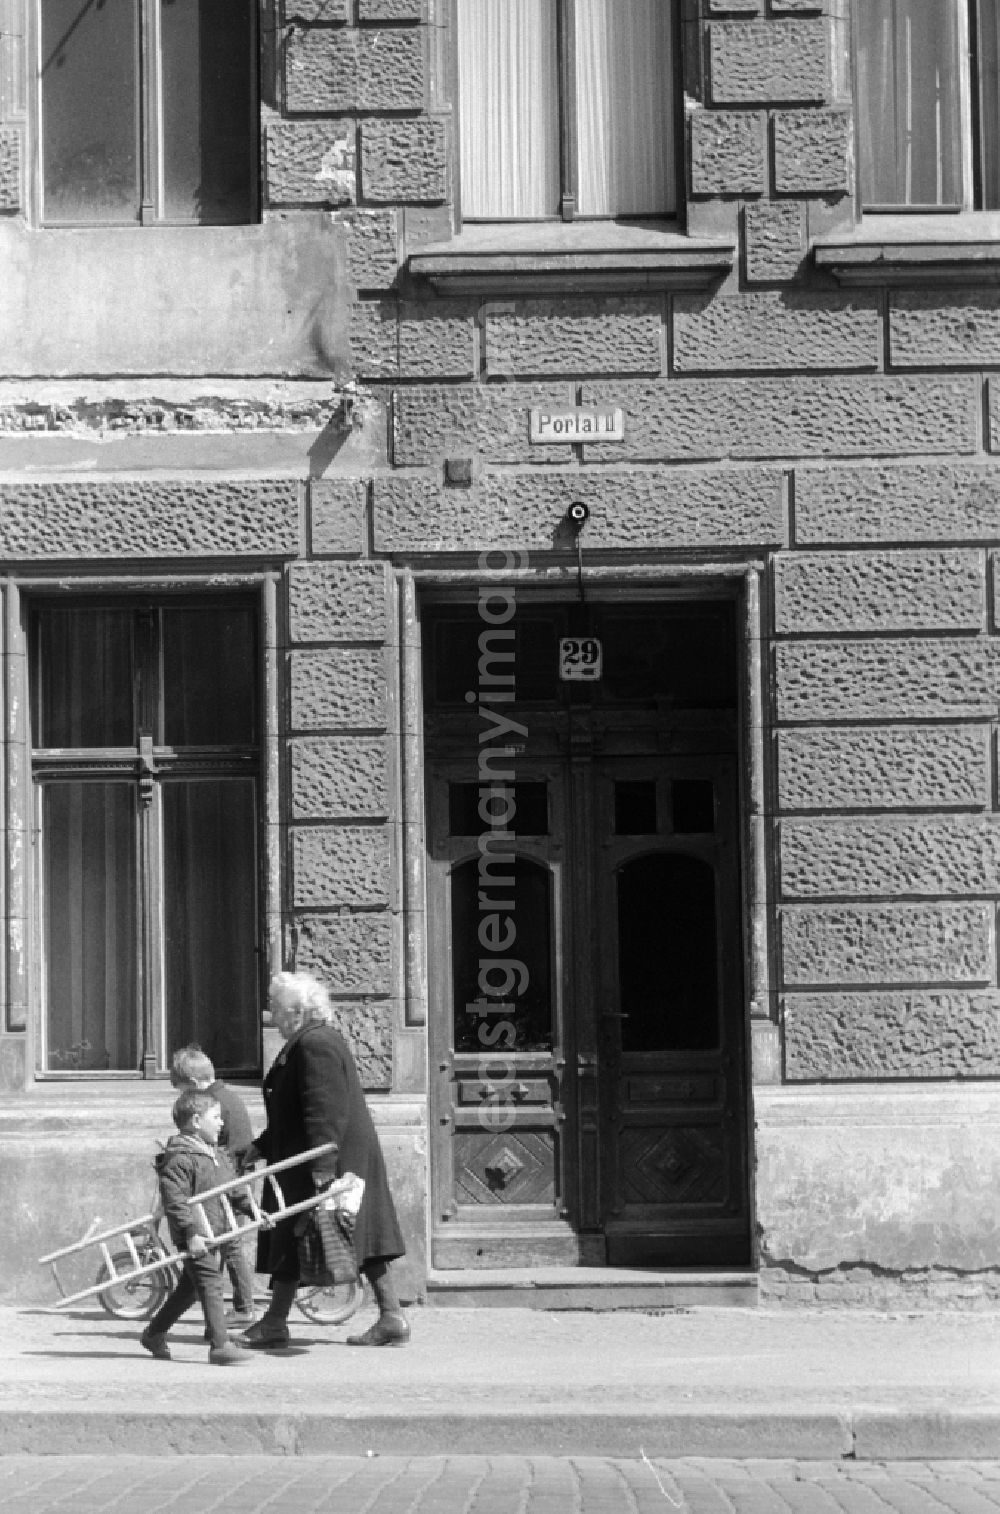 Berlin: Children are playing in front of the entrance of an old building in Berlin, the former capital of the GDR, German Democratic Republic